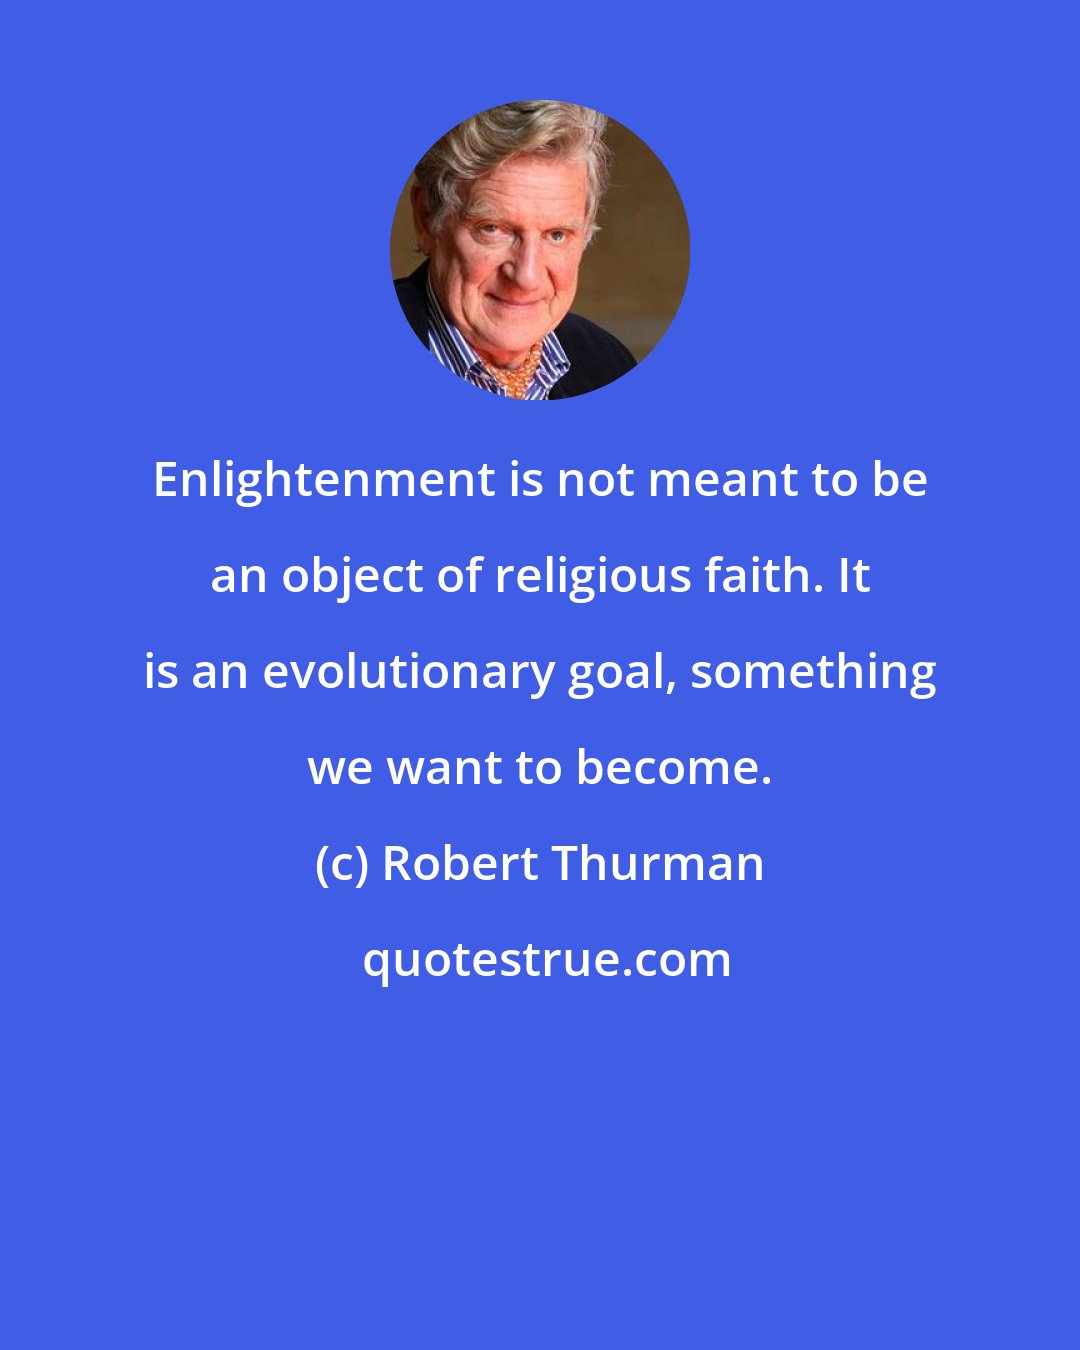 Robert Thurman: Enlightenment is not meant to be an object of religious faith. It is an evolutionary goal, something we want to become.